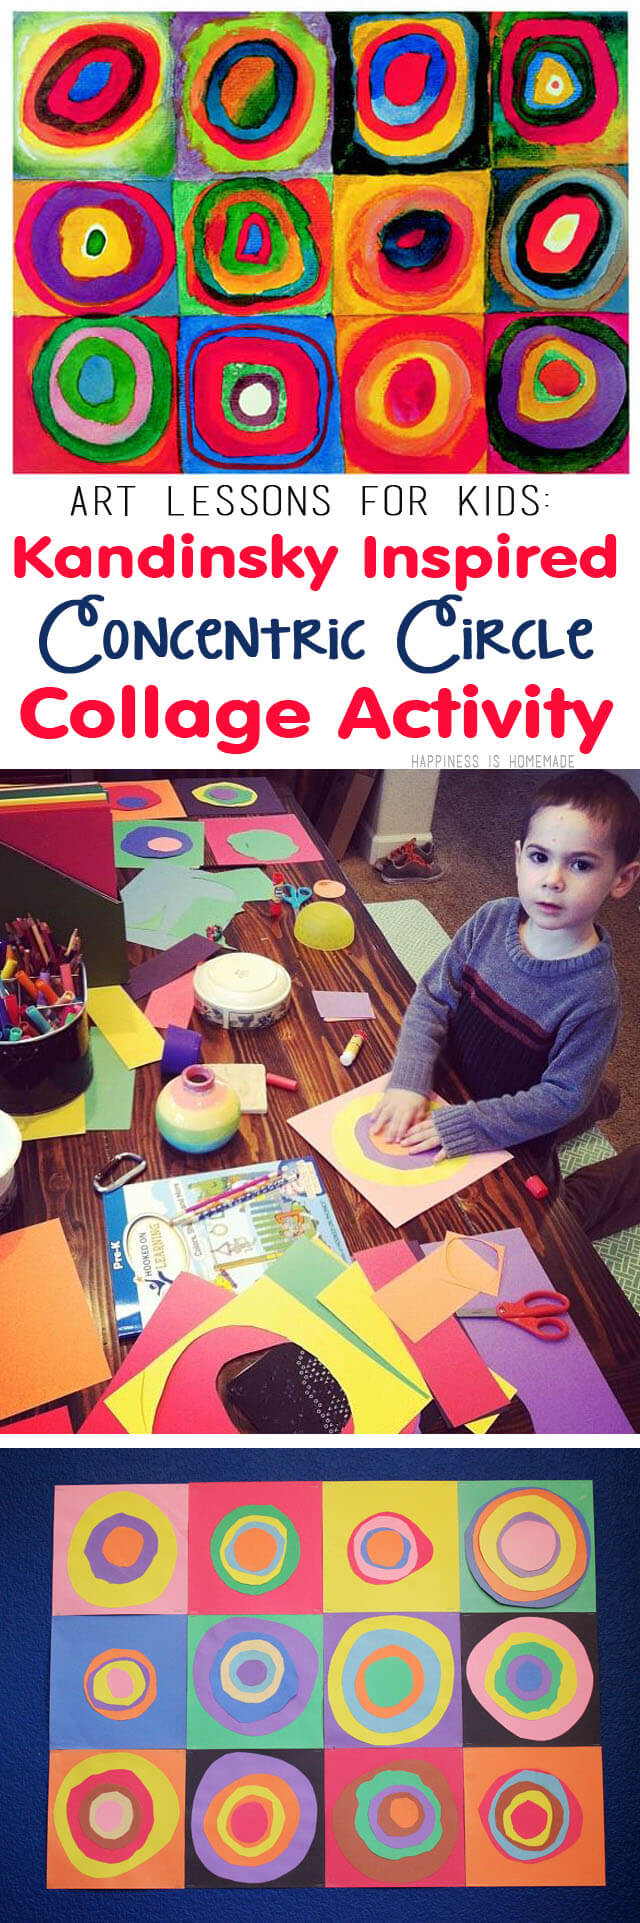 Art Lessons for Kids - Kandinsky Inspired Concentric Circles Collage Activity